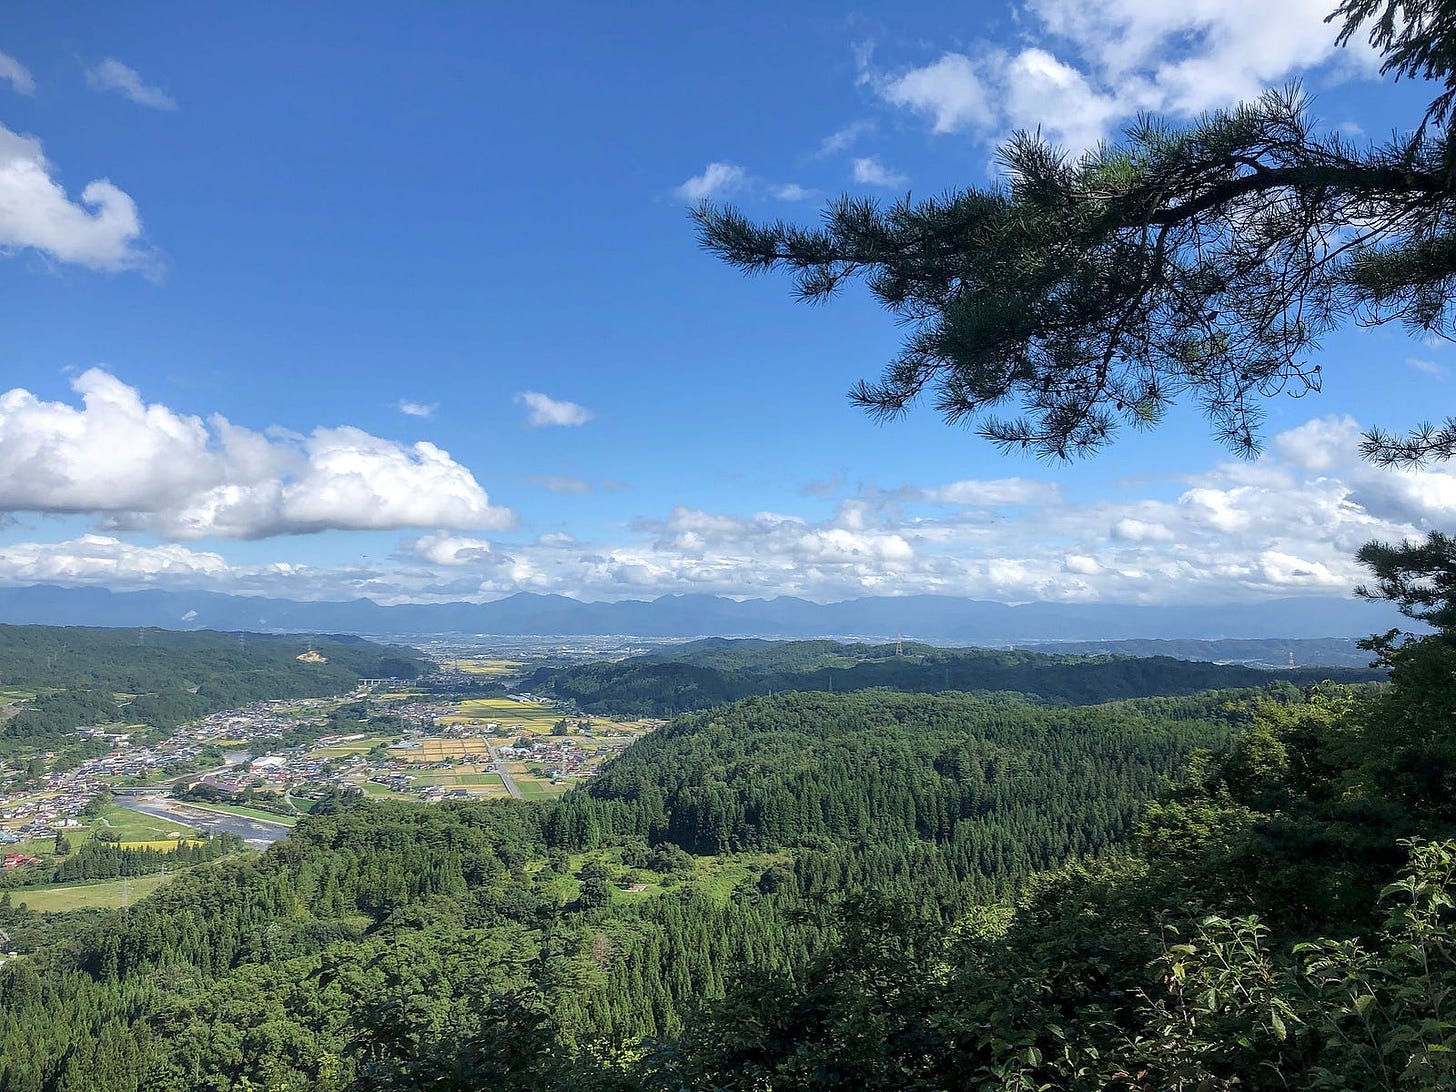 Looking out from the summit of Tengu-yama in Nishikawa, Yamagata Prefecture towards a bright blue sky with clouds, mountains in the distance, forests and rural towns in the foreground.